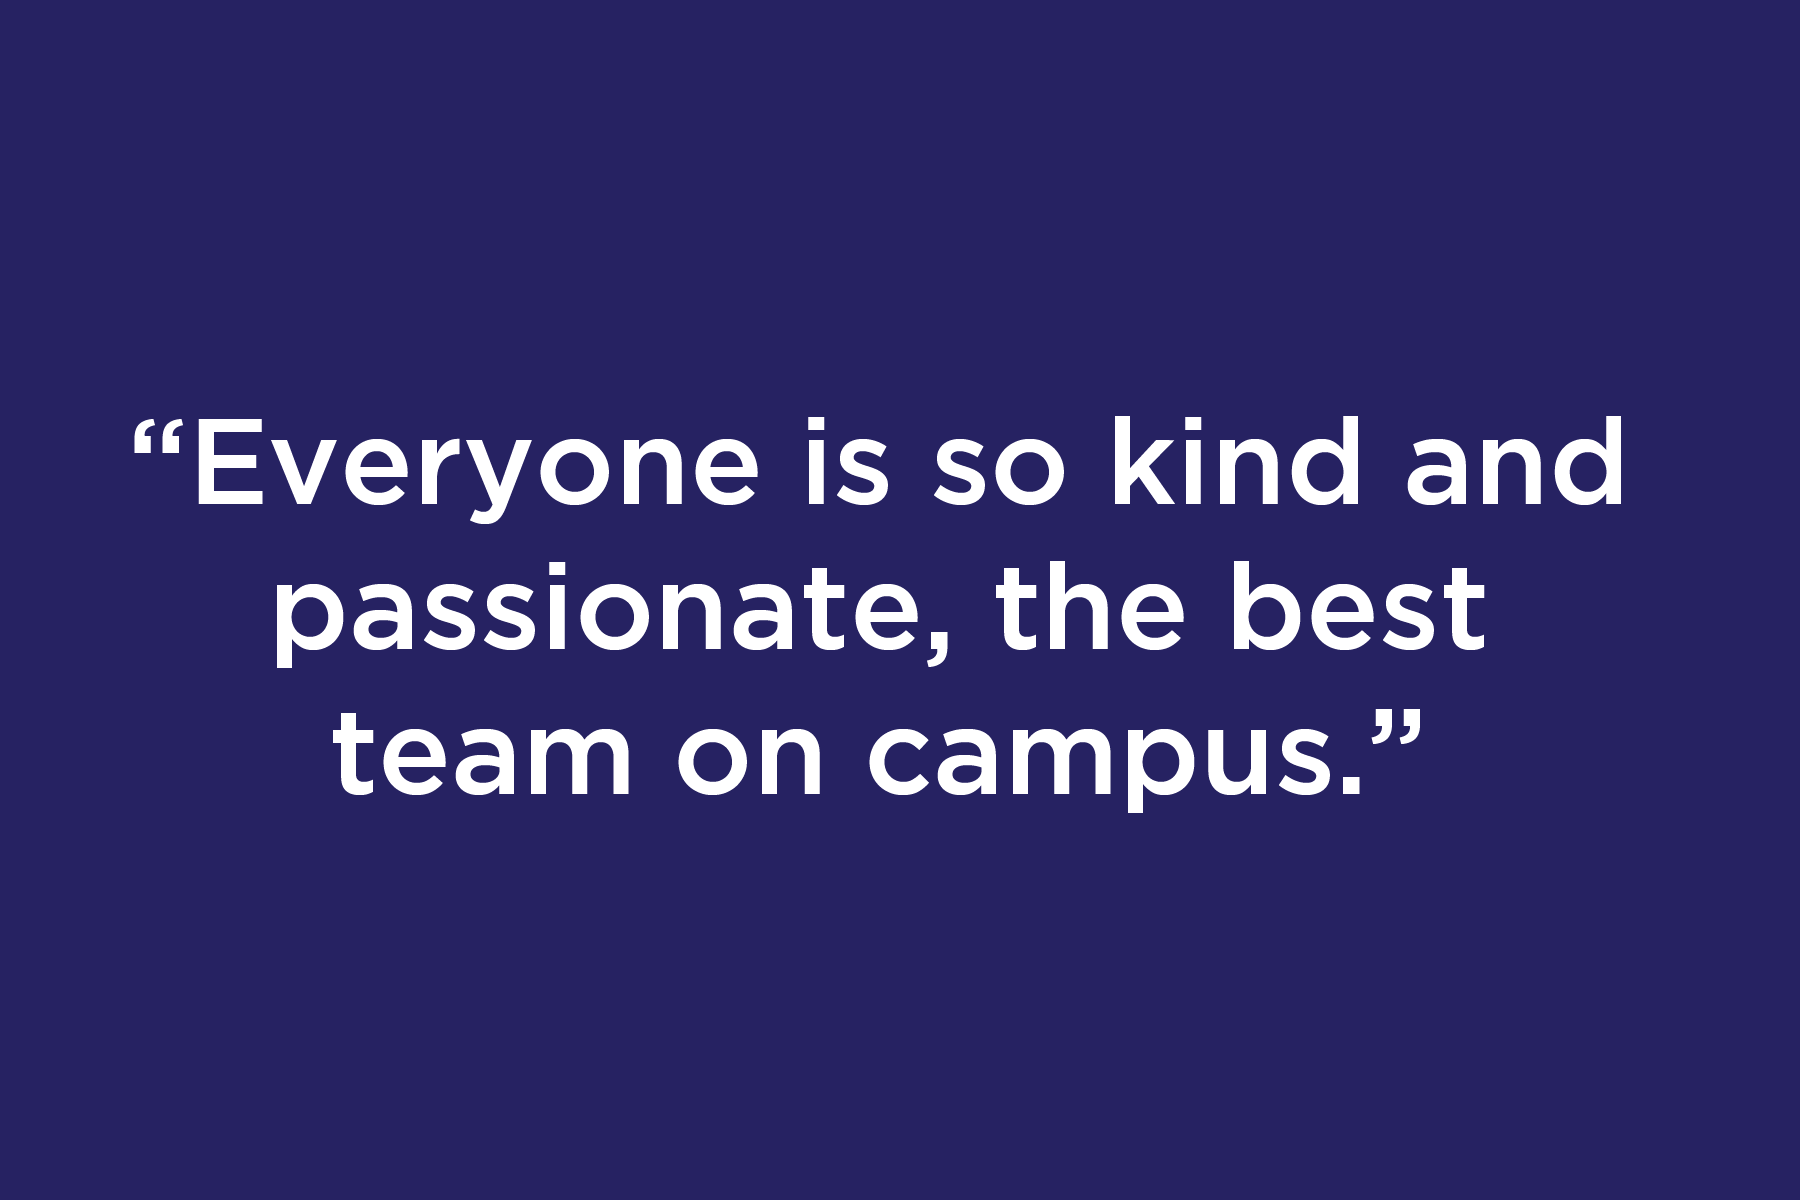 Everyone is so kind and passionate, the best team on campus
